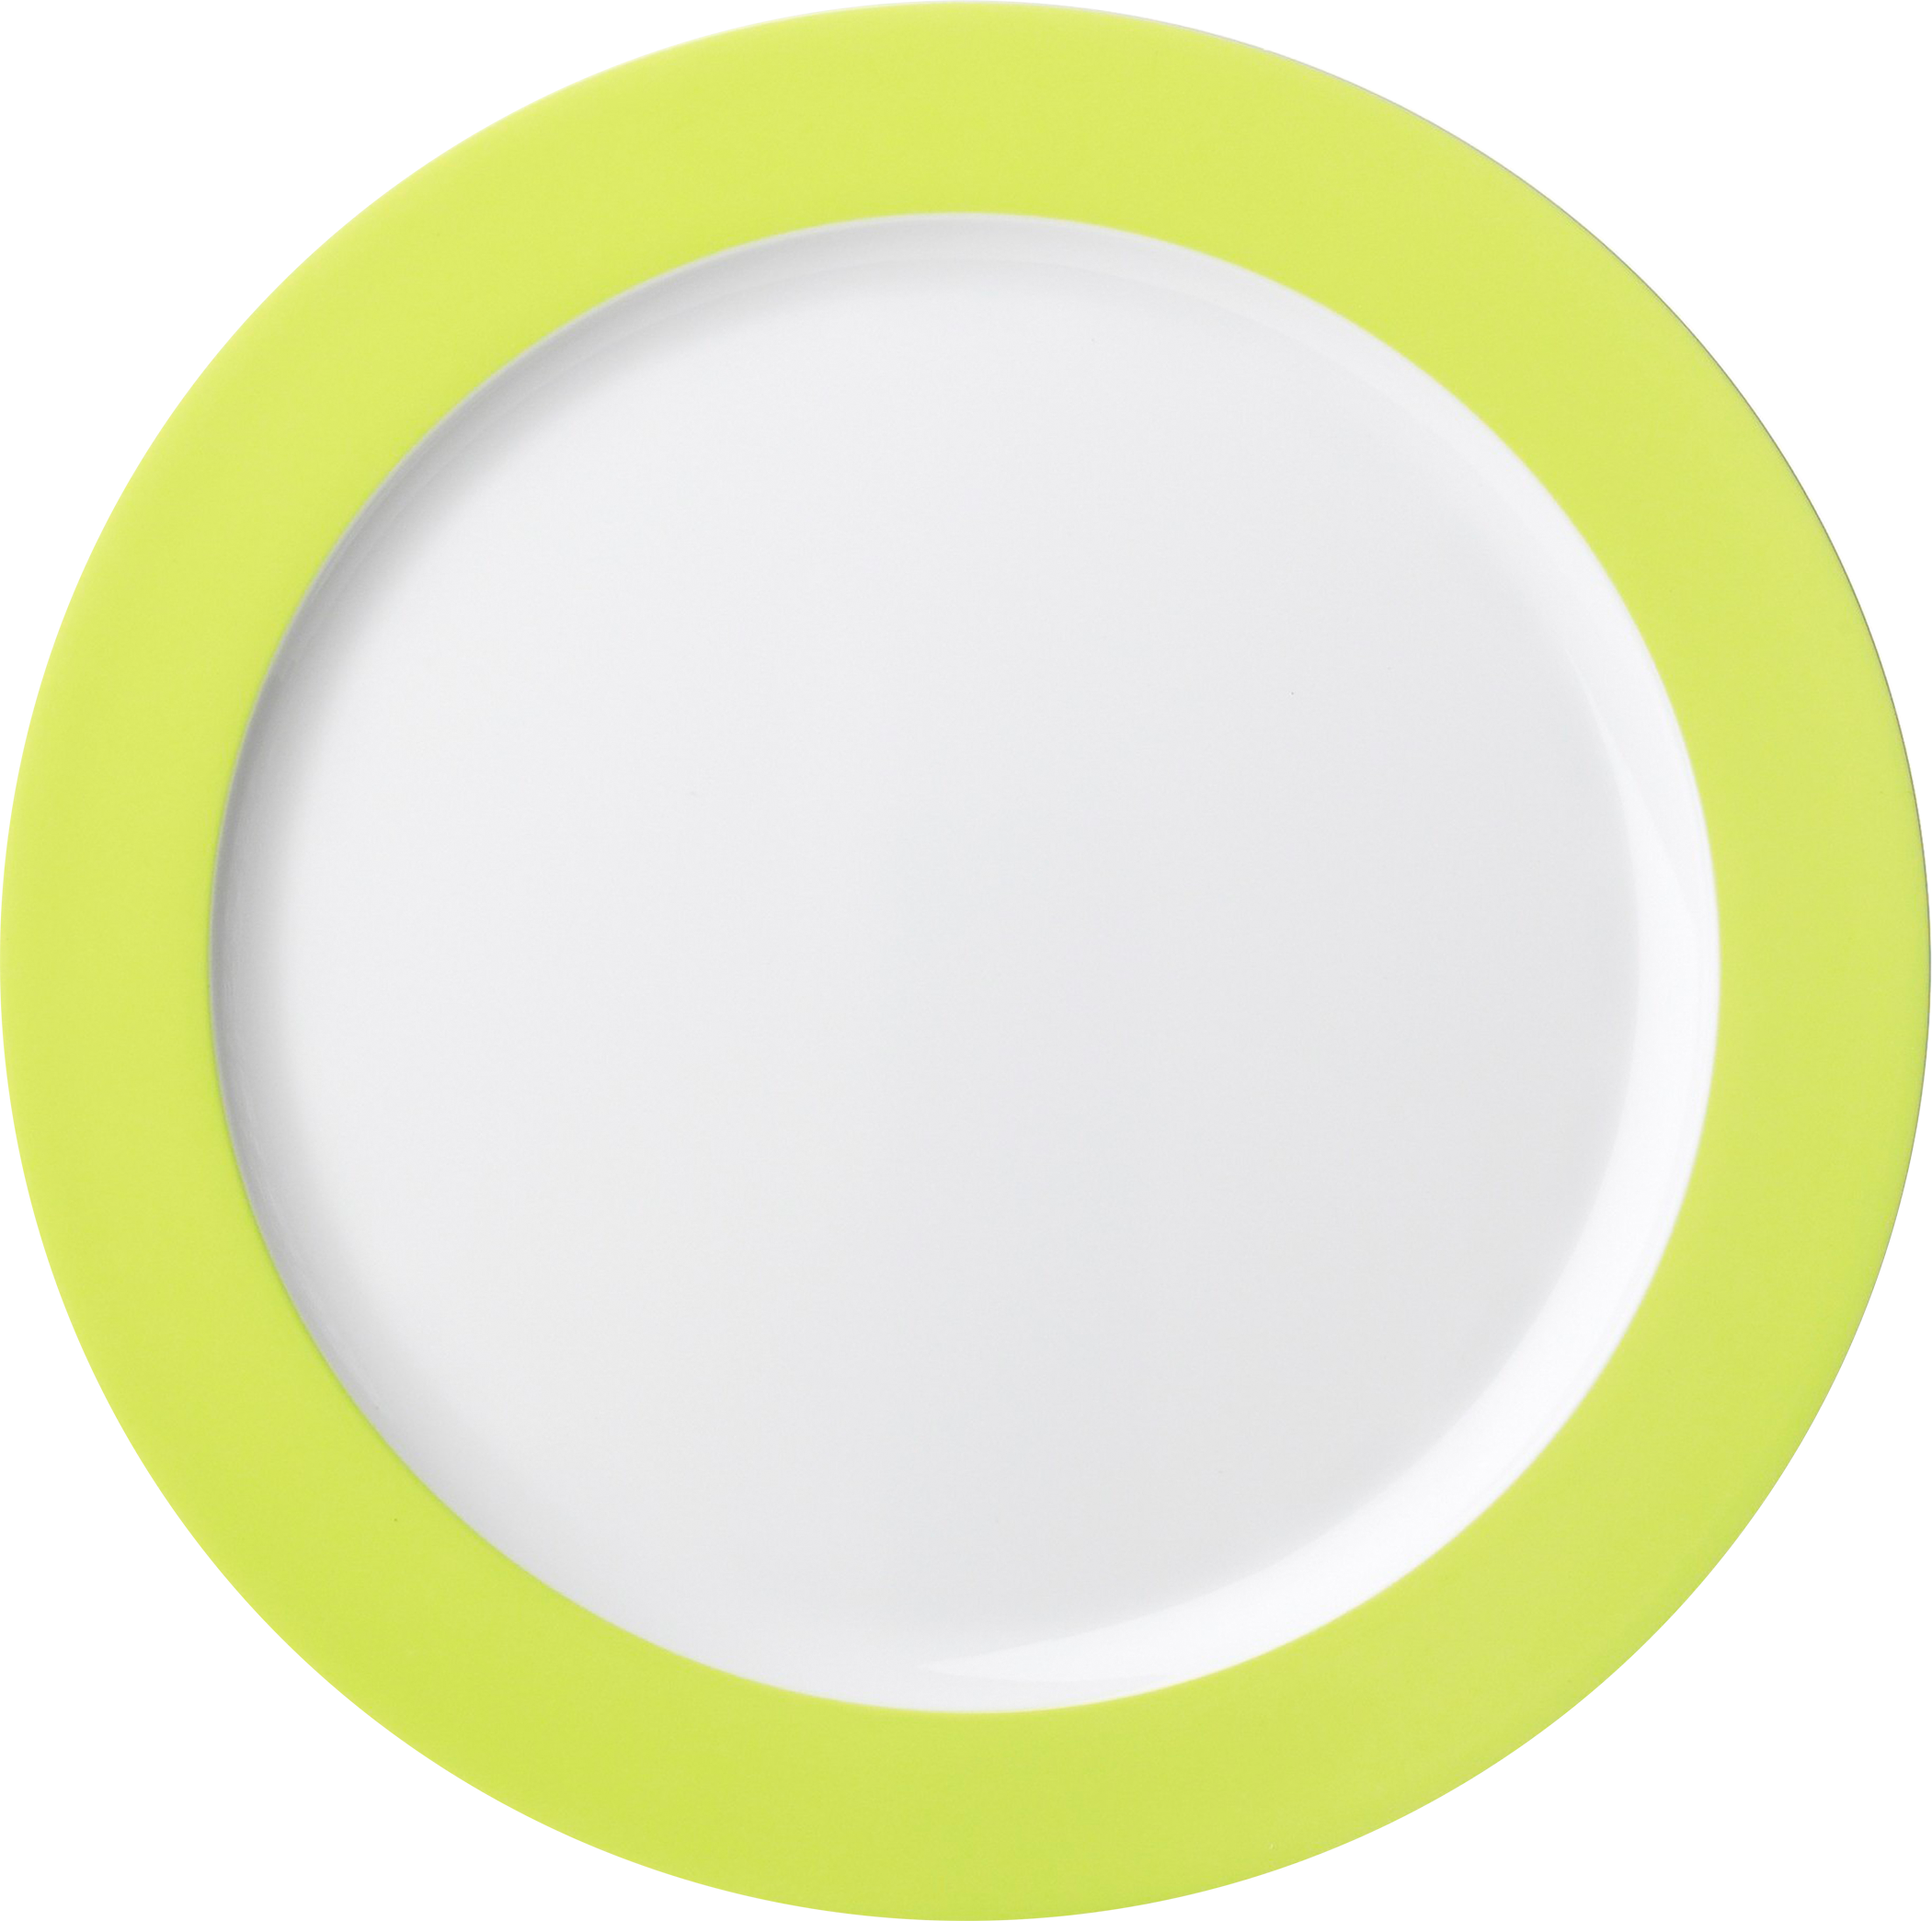 Dish clipart green plate. Plates png photo images